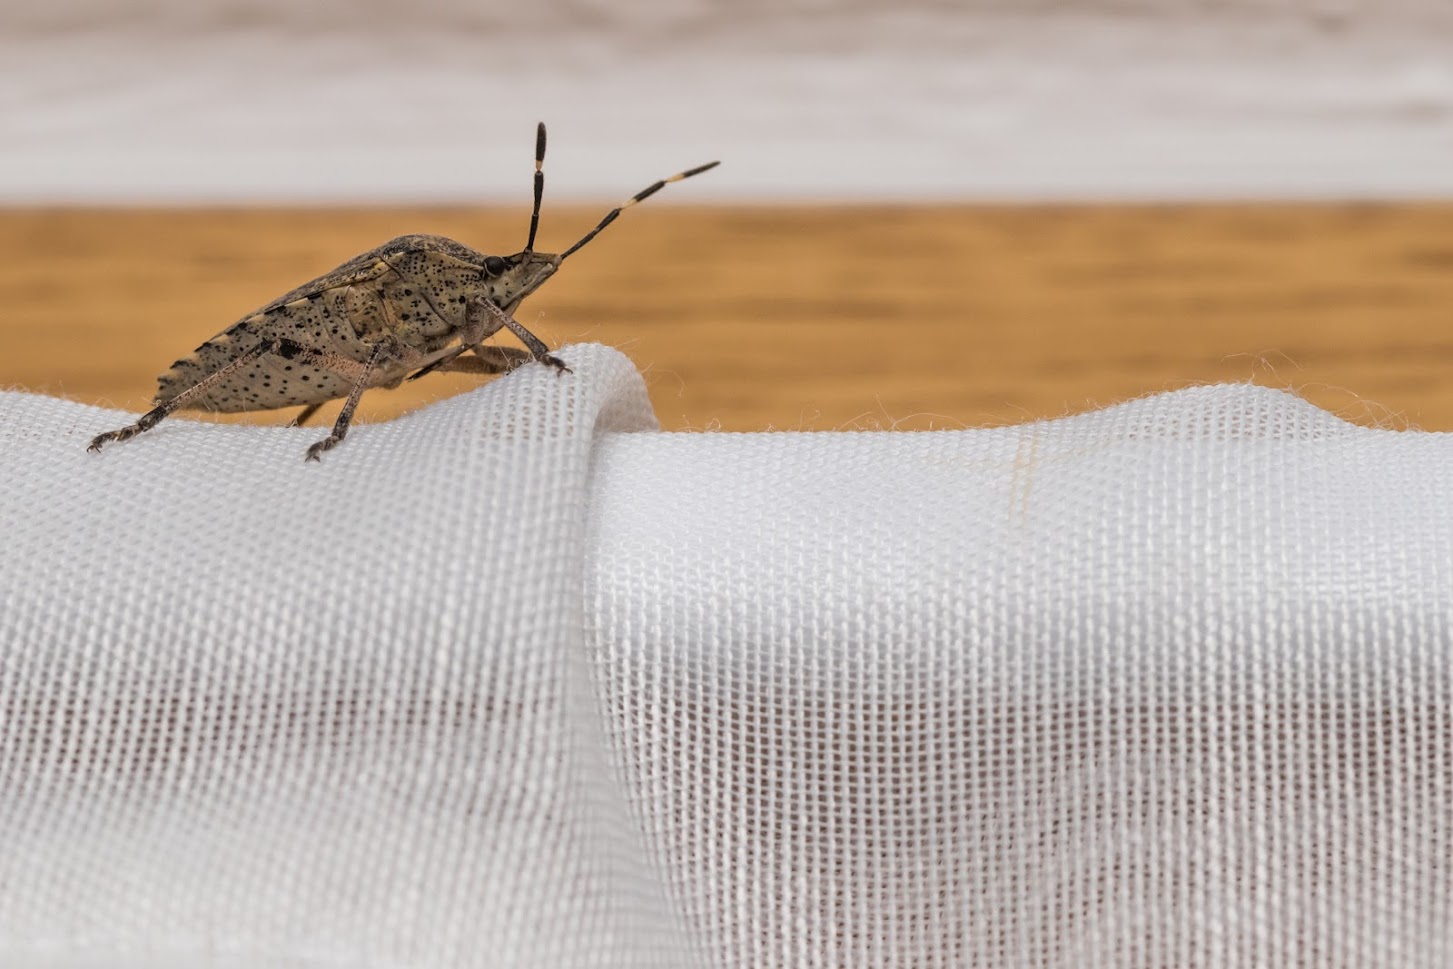 Telltale Signs Your House Has a Pest Infestation